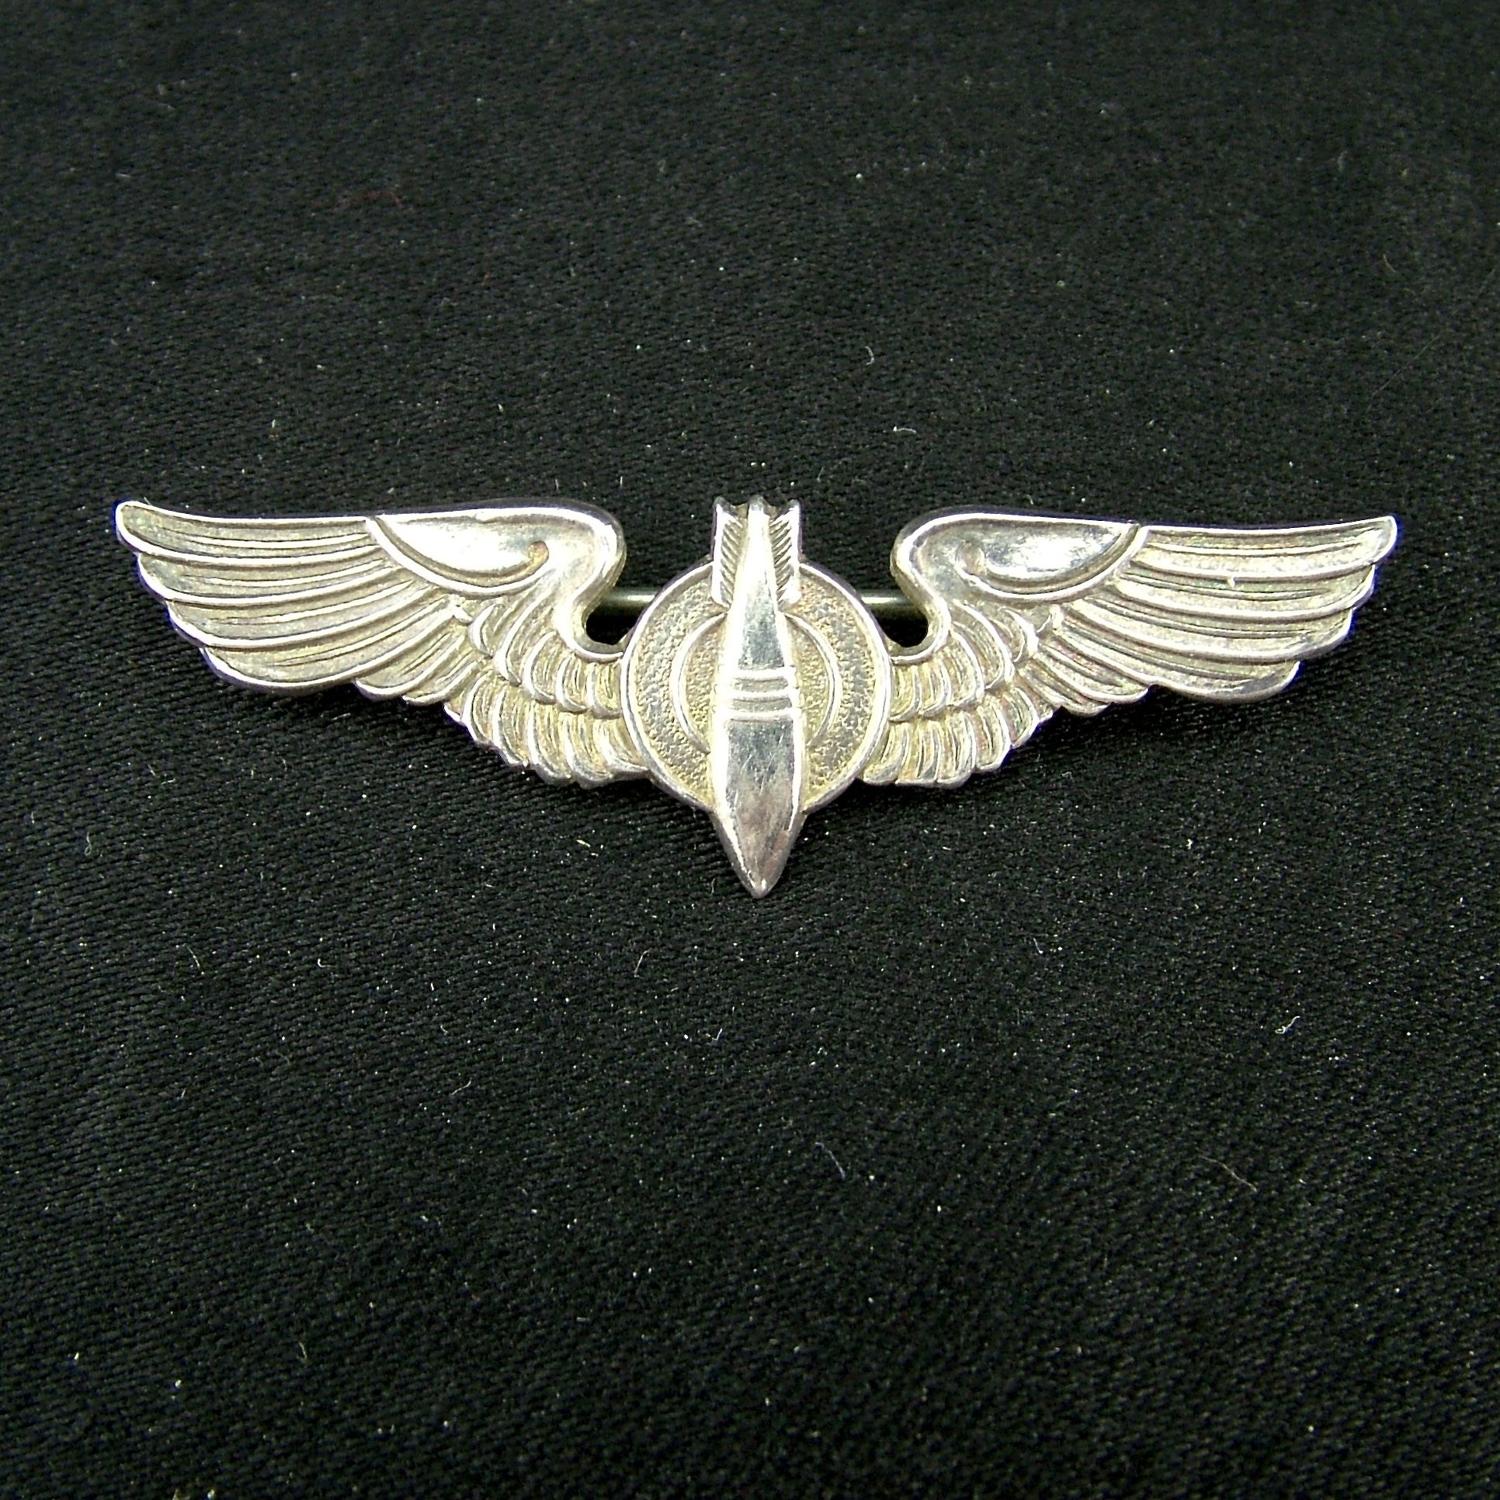 USAAF bombardier shirt wing